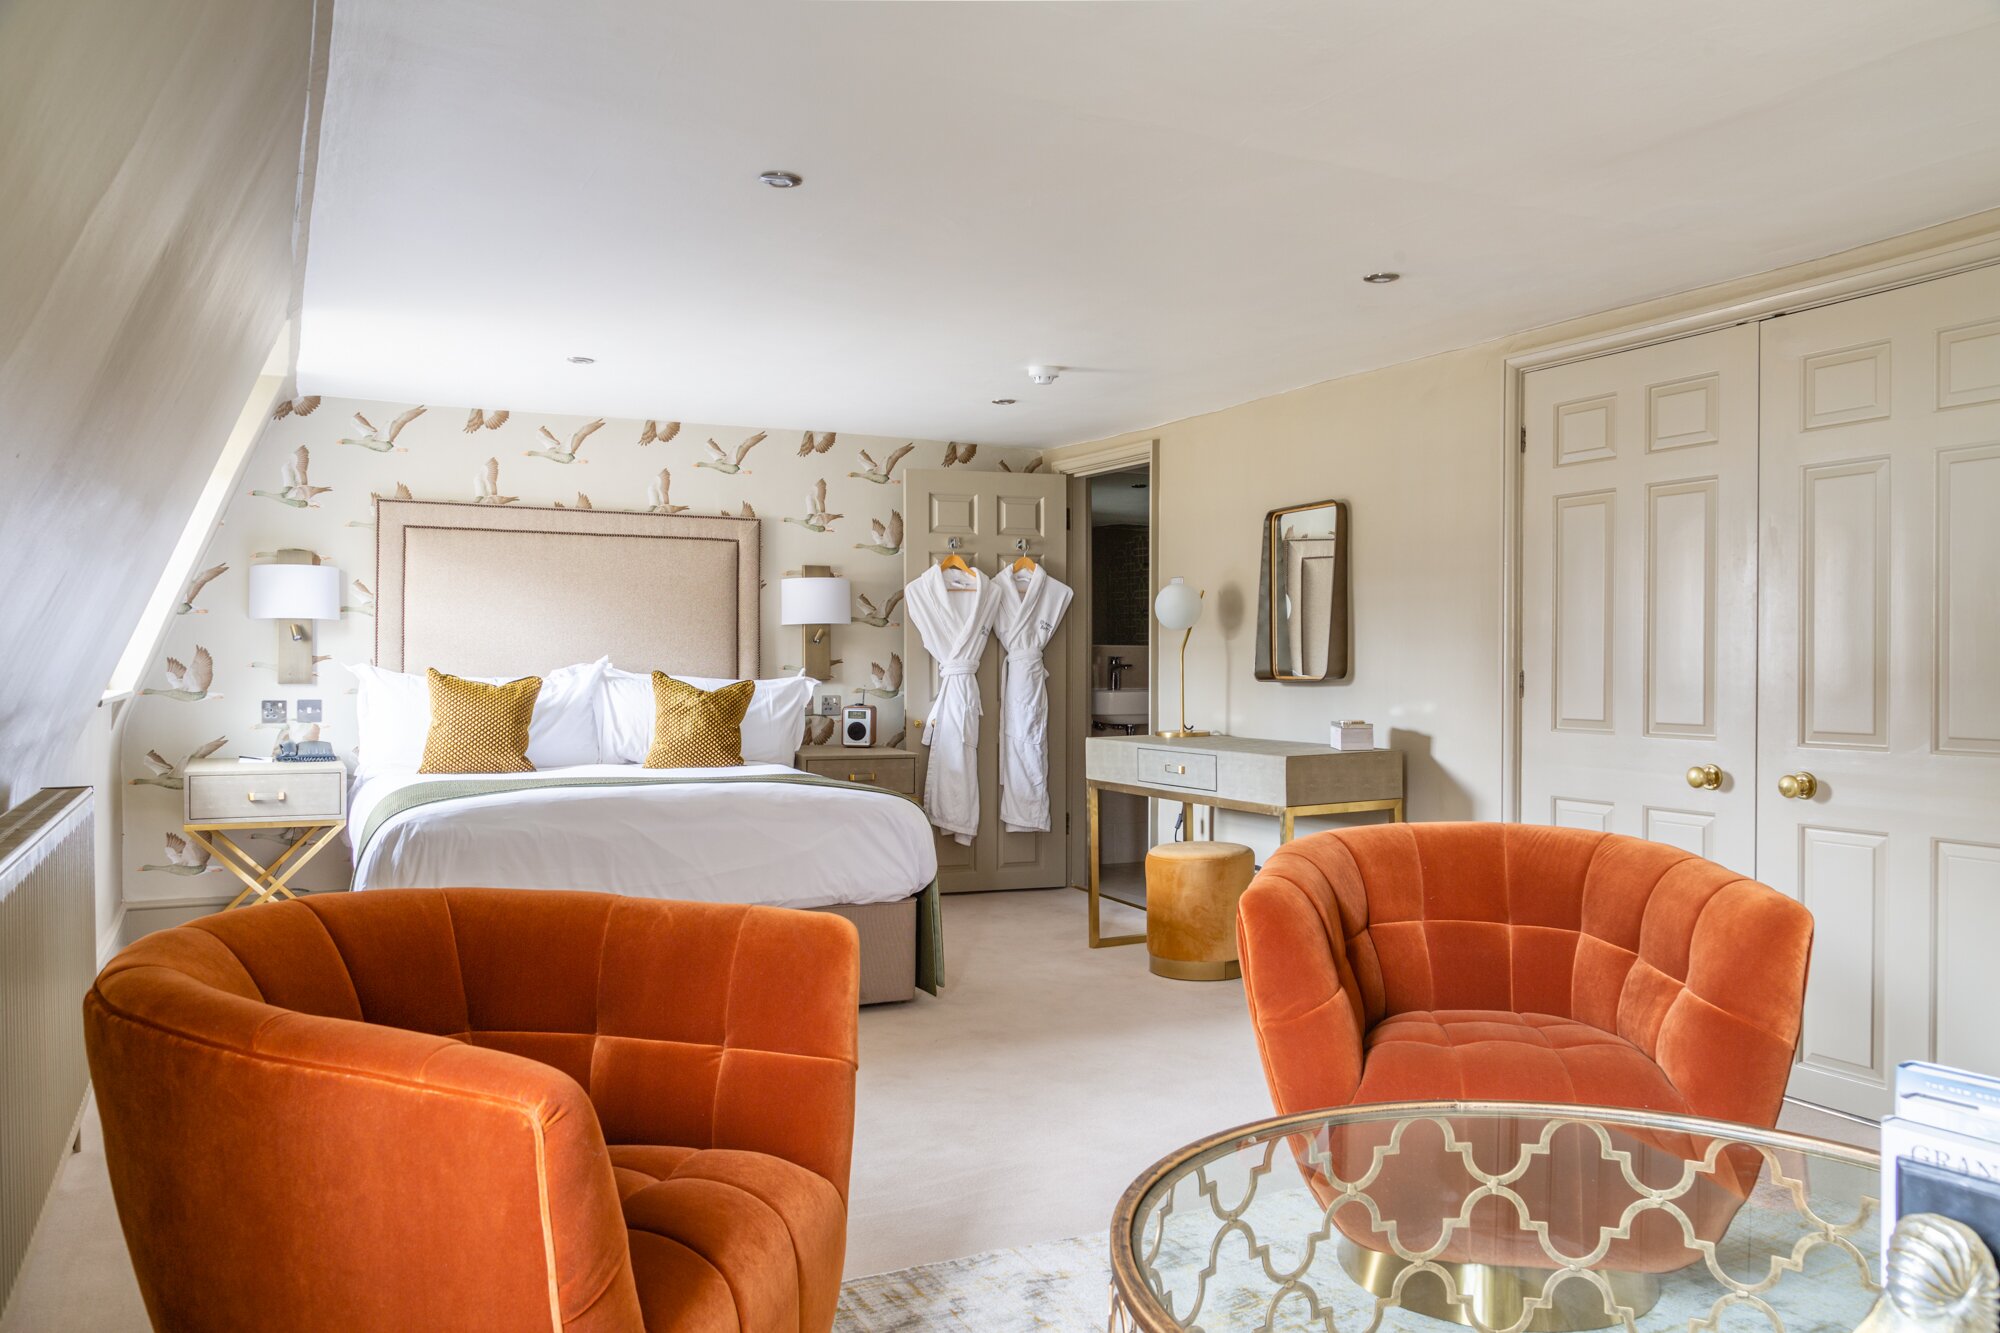 Cateys 2020: Hotel of the Year – Independent: The Queensberry hotel